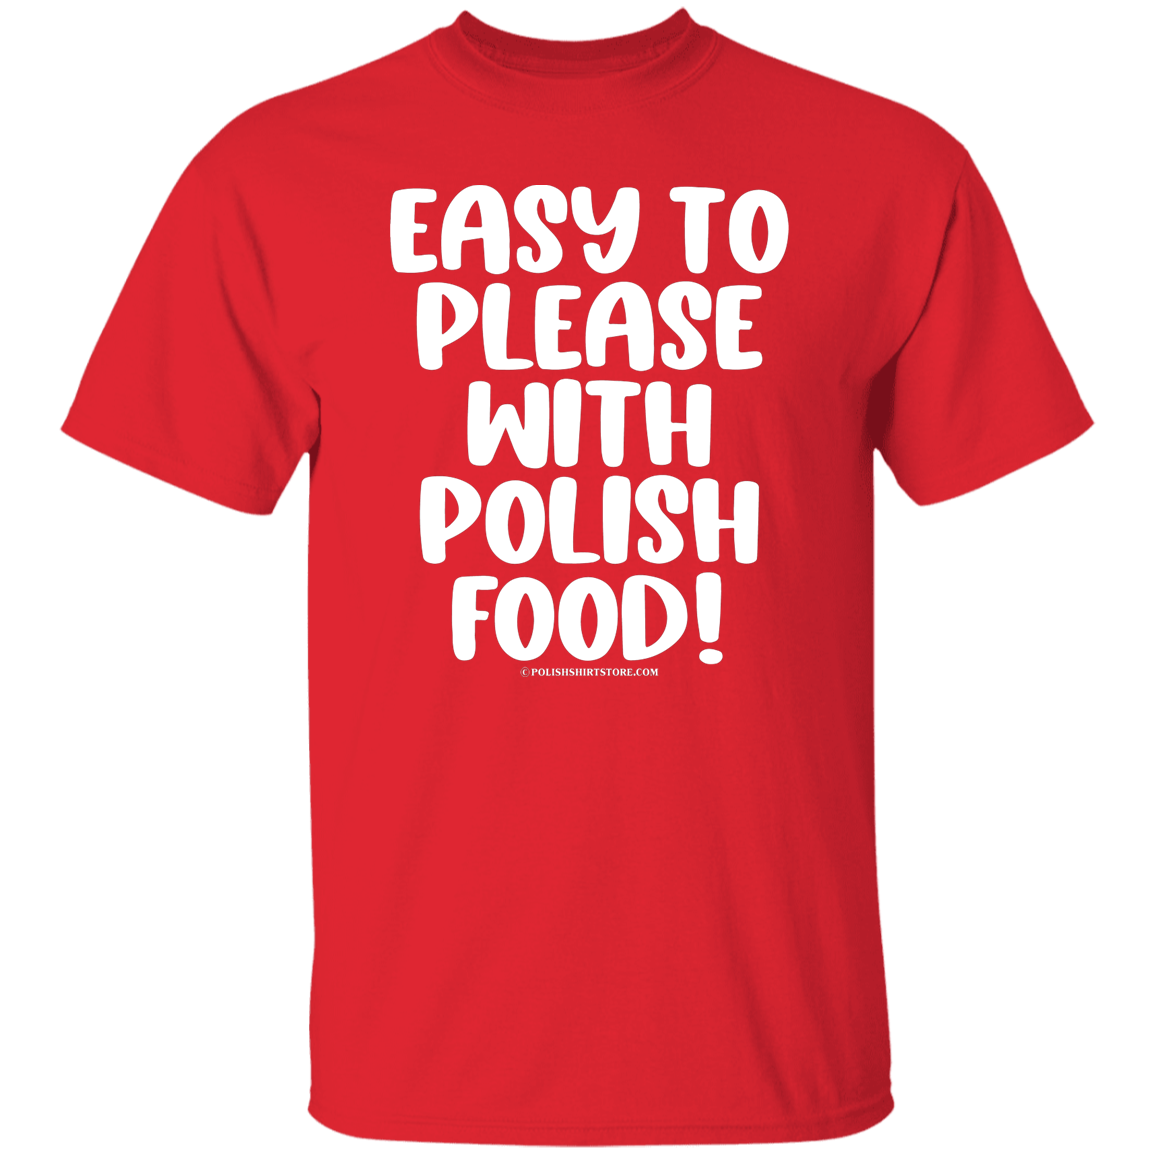 Easy To Please With Polish Food Apparel CustomCat G500 5.3 oz. T-Shirt Red S